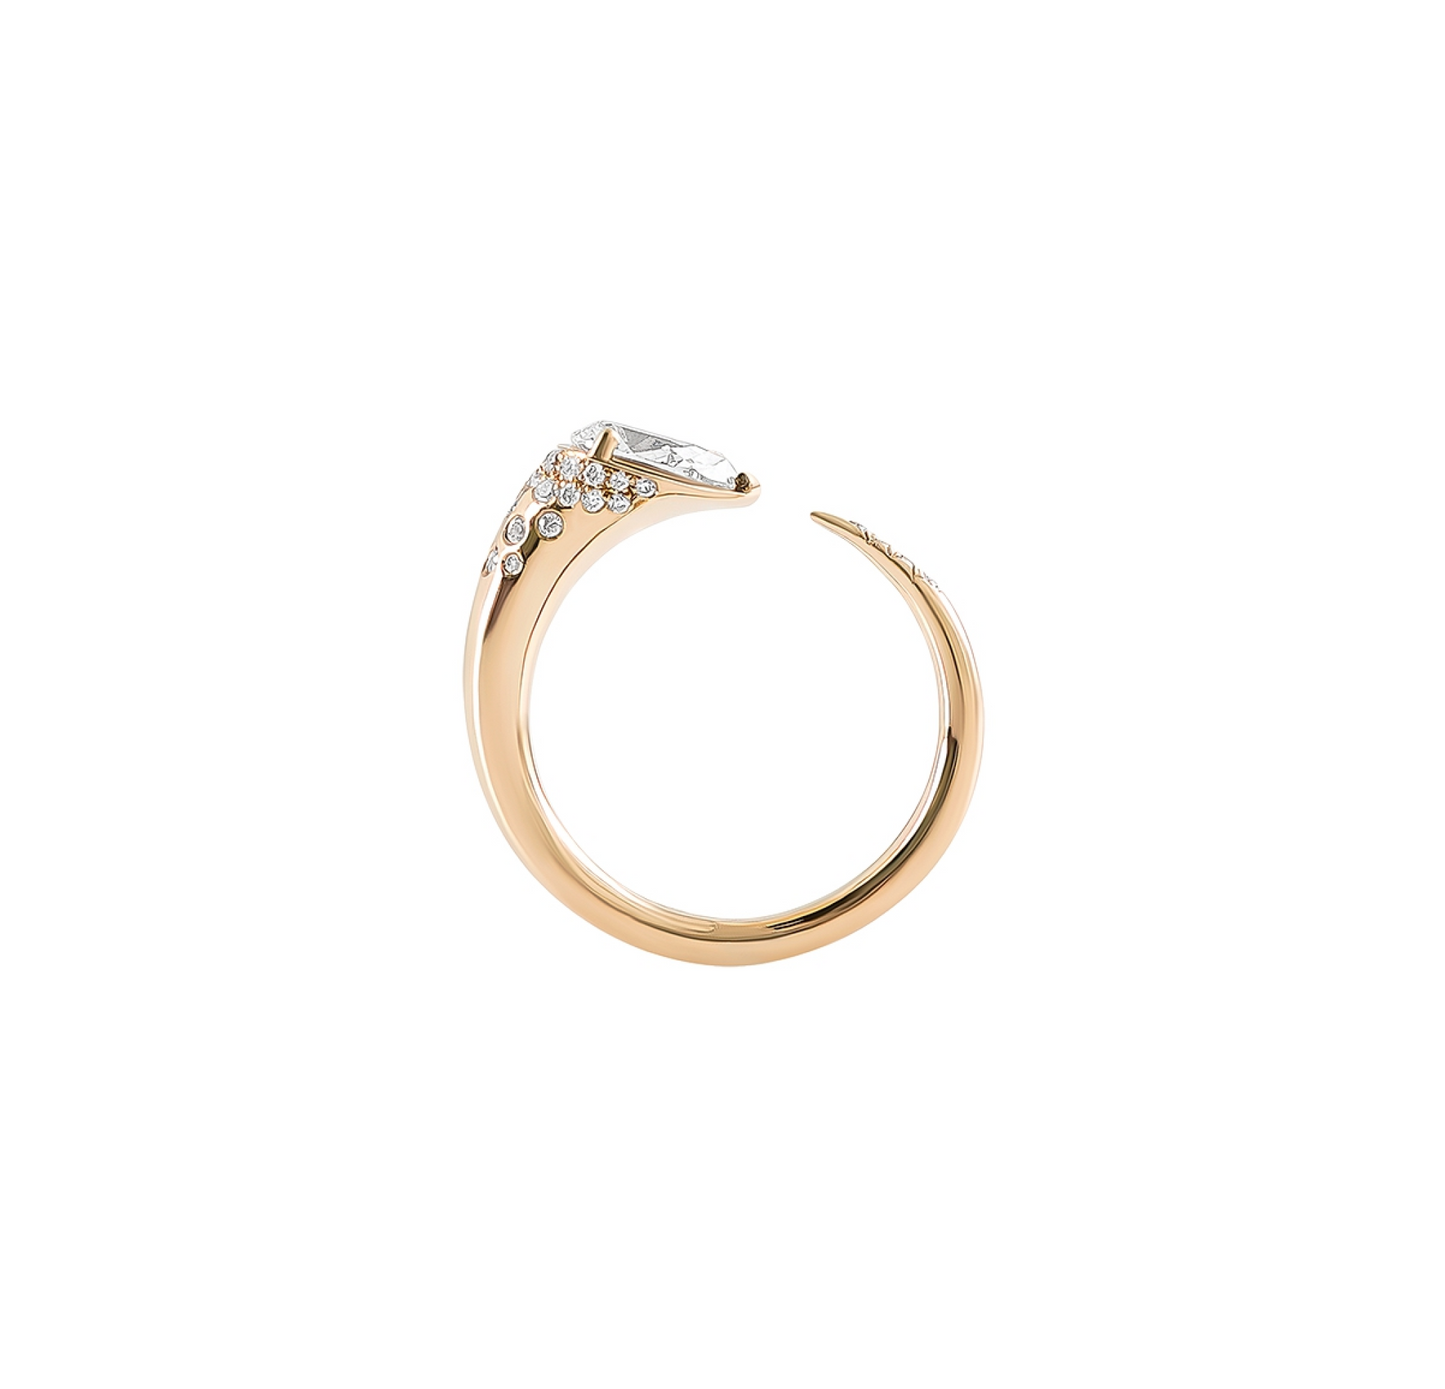 Sornette ring with dots, diamond, and yellow gold